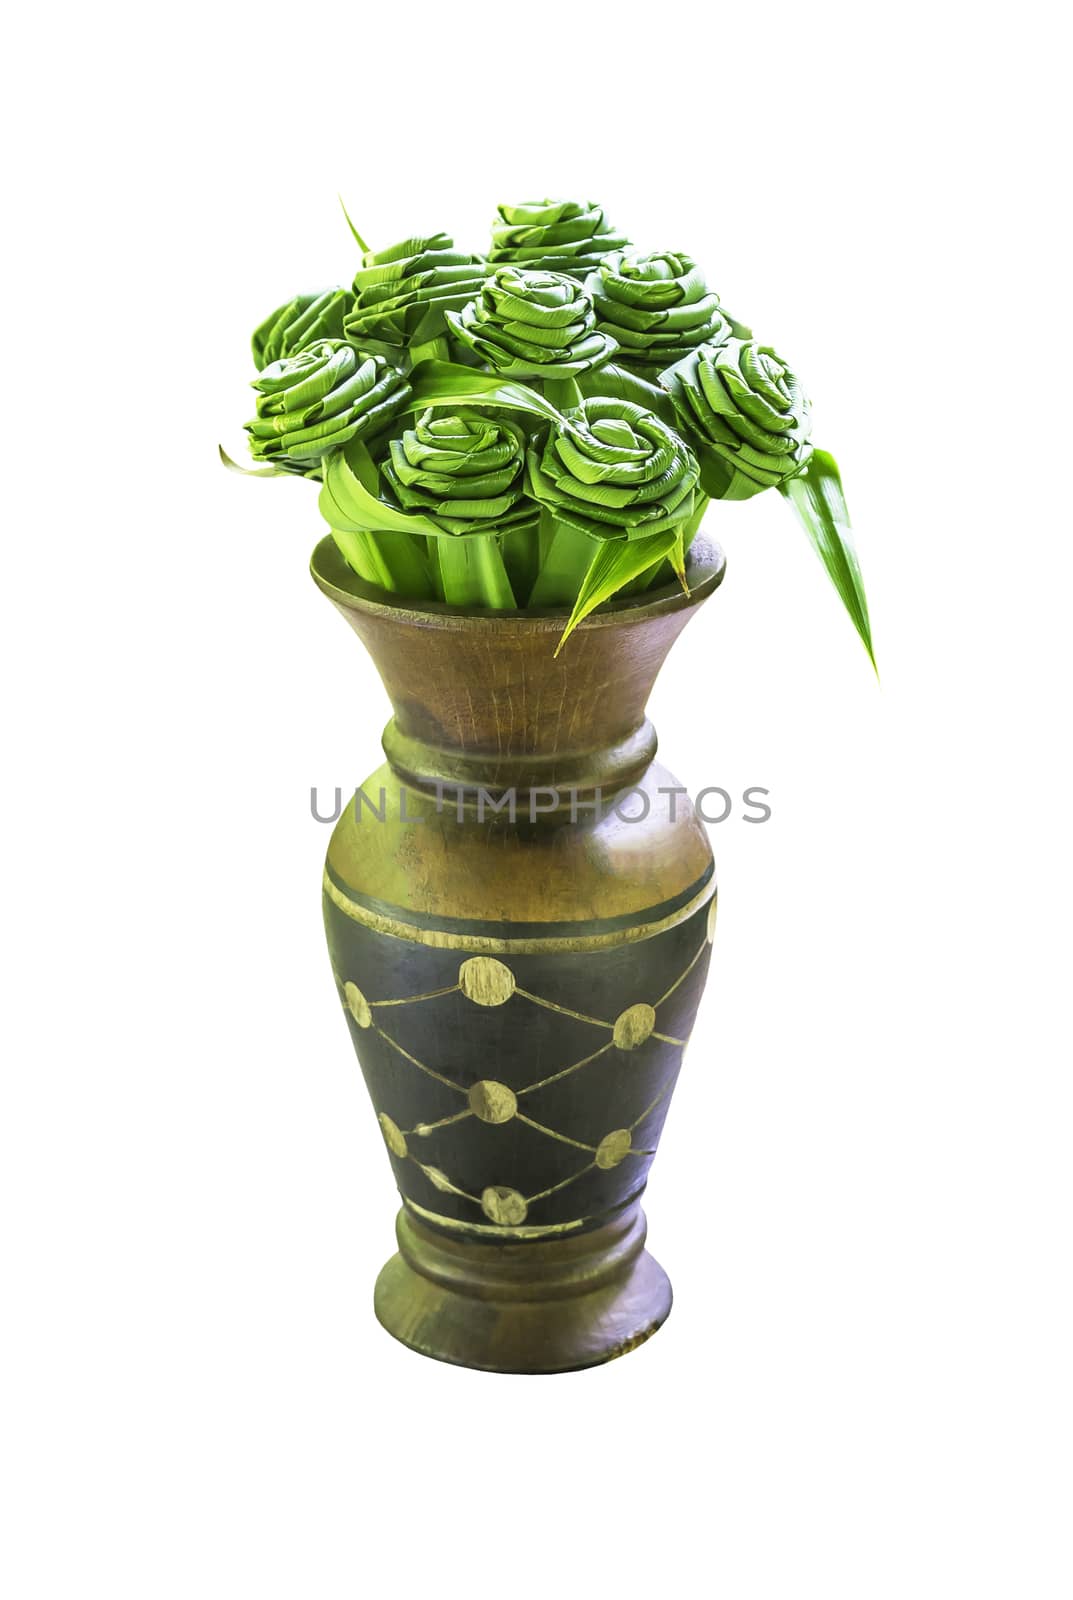 Pandanus amaryllifolius leaves in wooden vase isolated on white with clipping path